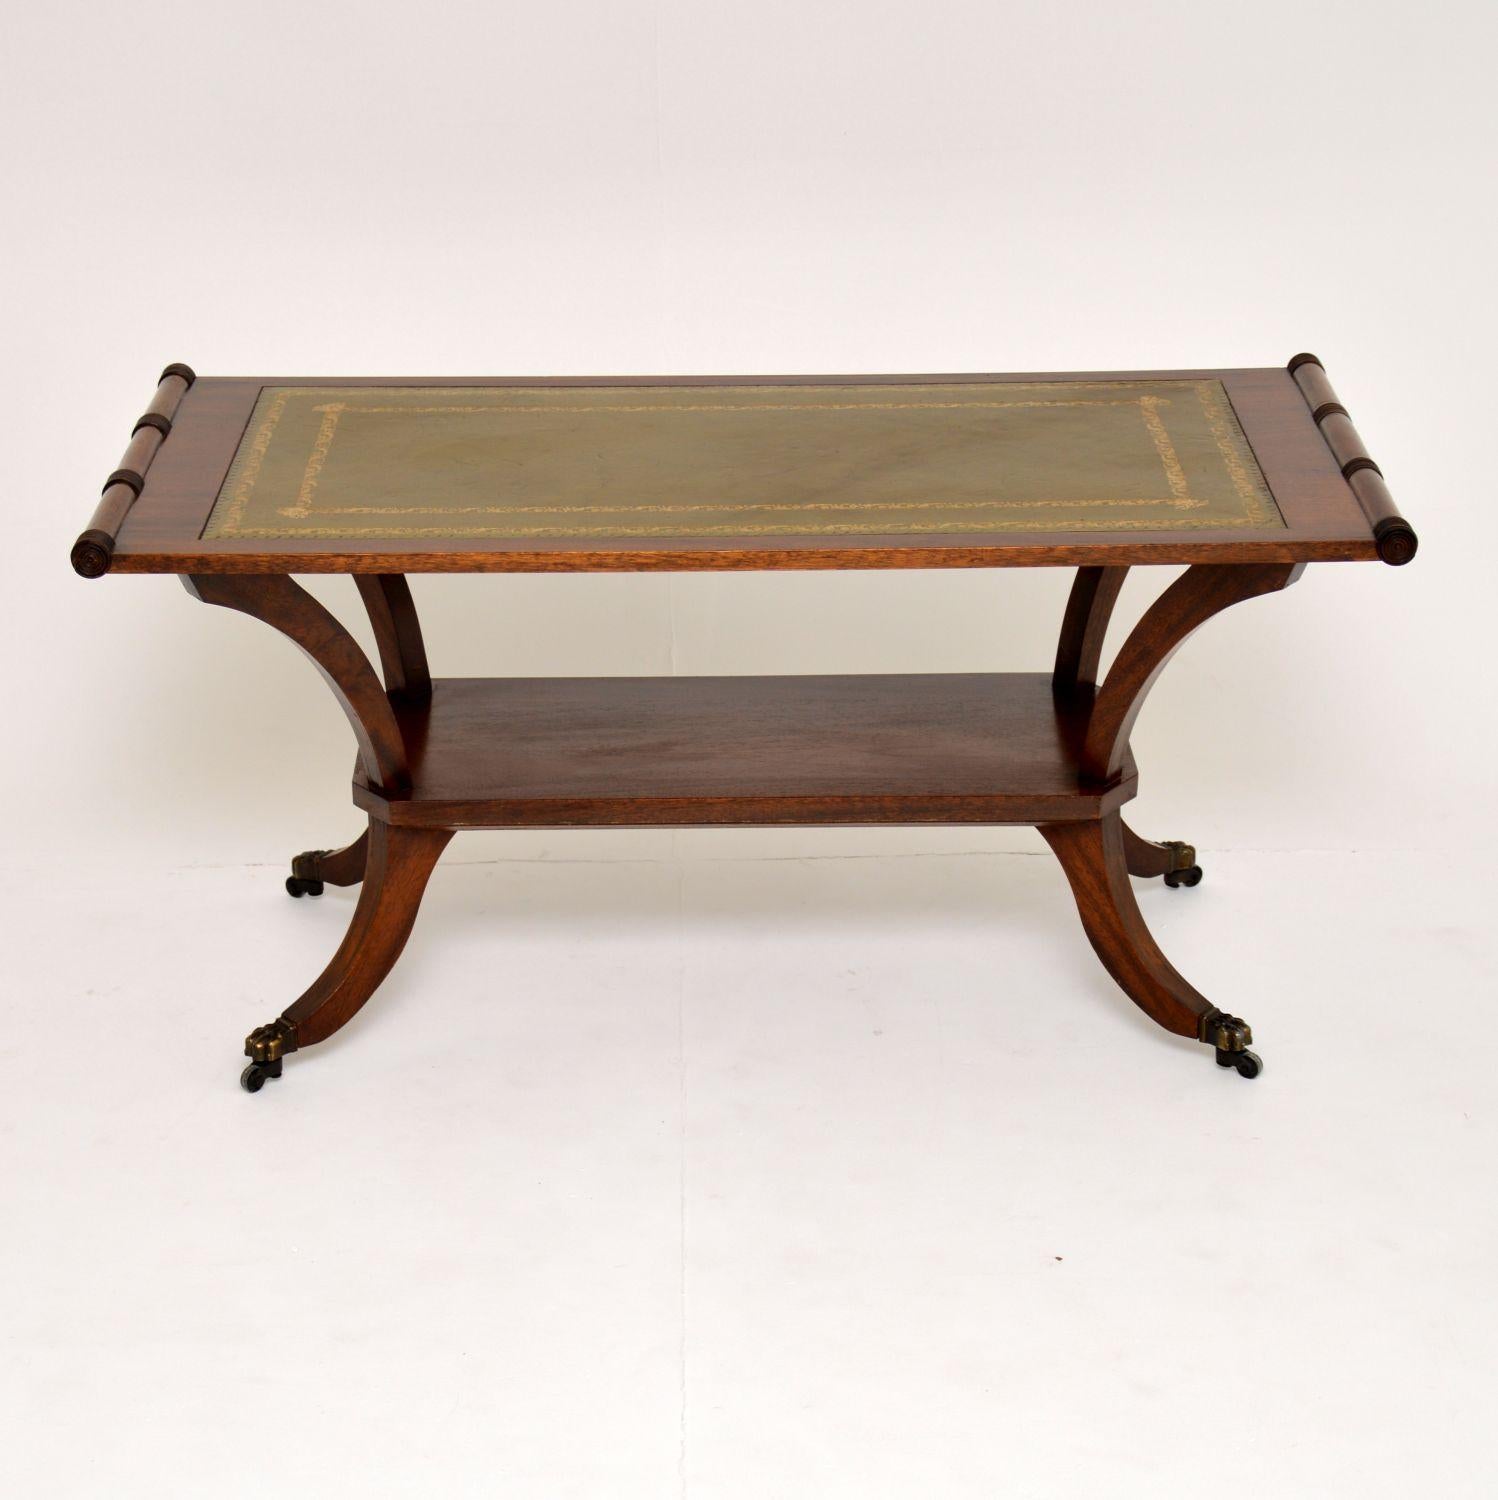 Antique Regency style mahogany coffee table in good original condition, which I would date from circa 1930s period.

This table has come straight out of a London residence and we didn’t think it merited sending down to our polishers, so we gave it